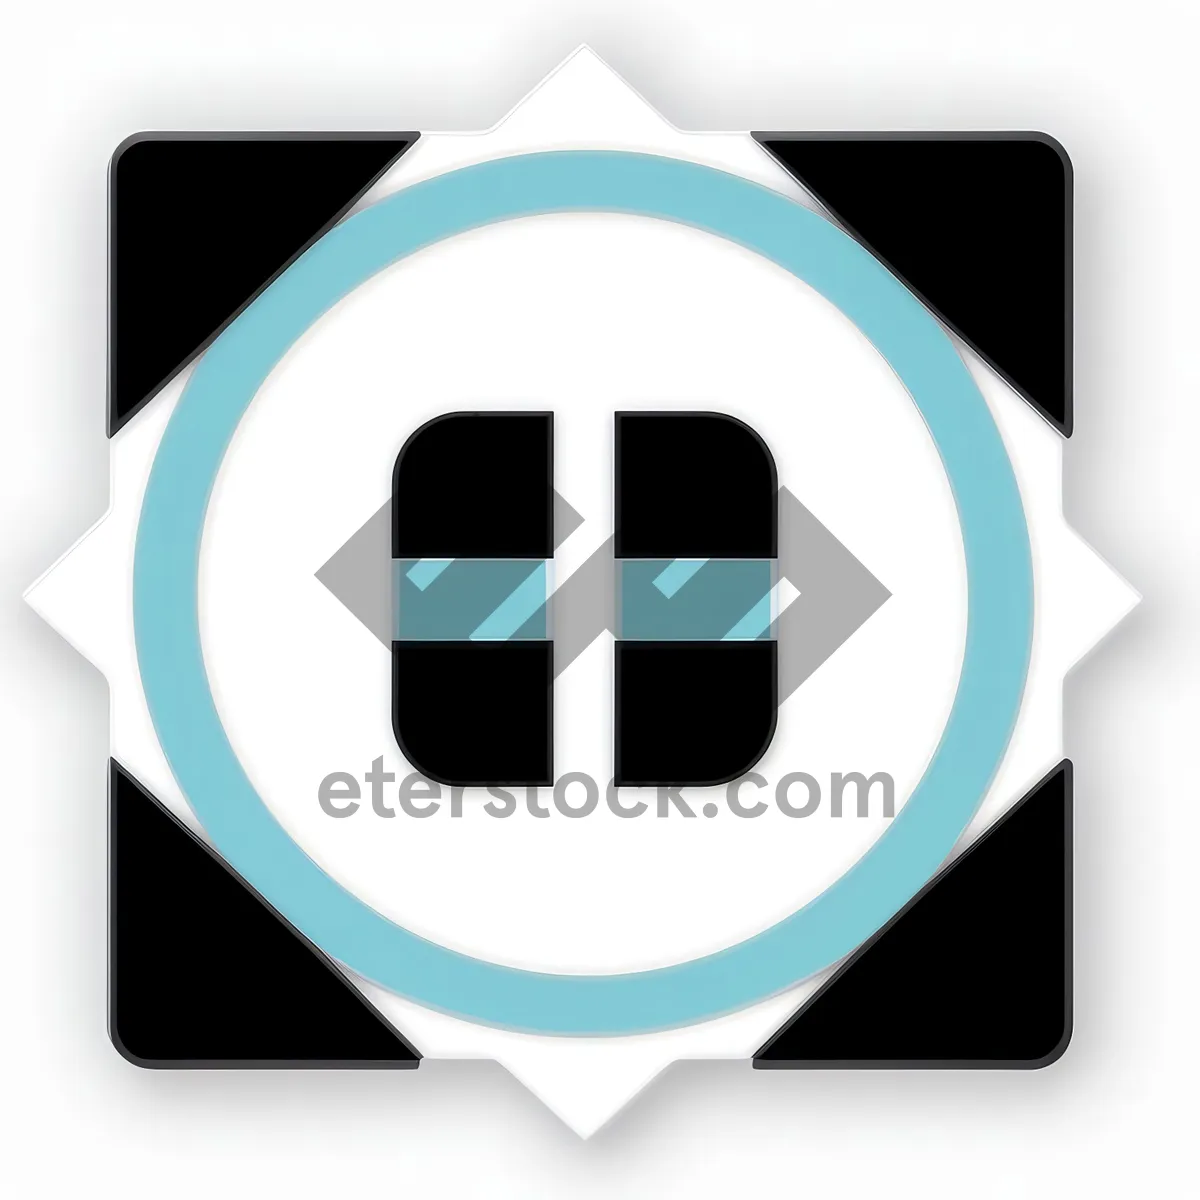 Picture of Web Button Icons Set - Black Glossy Symbols